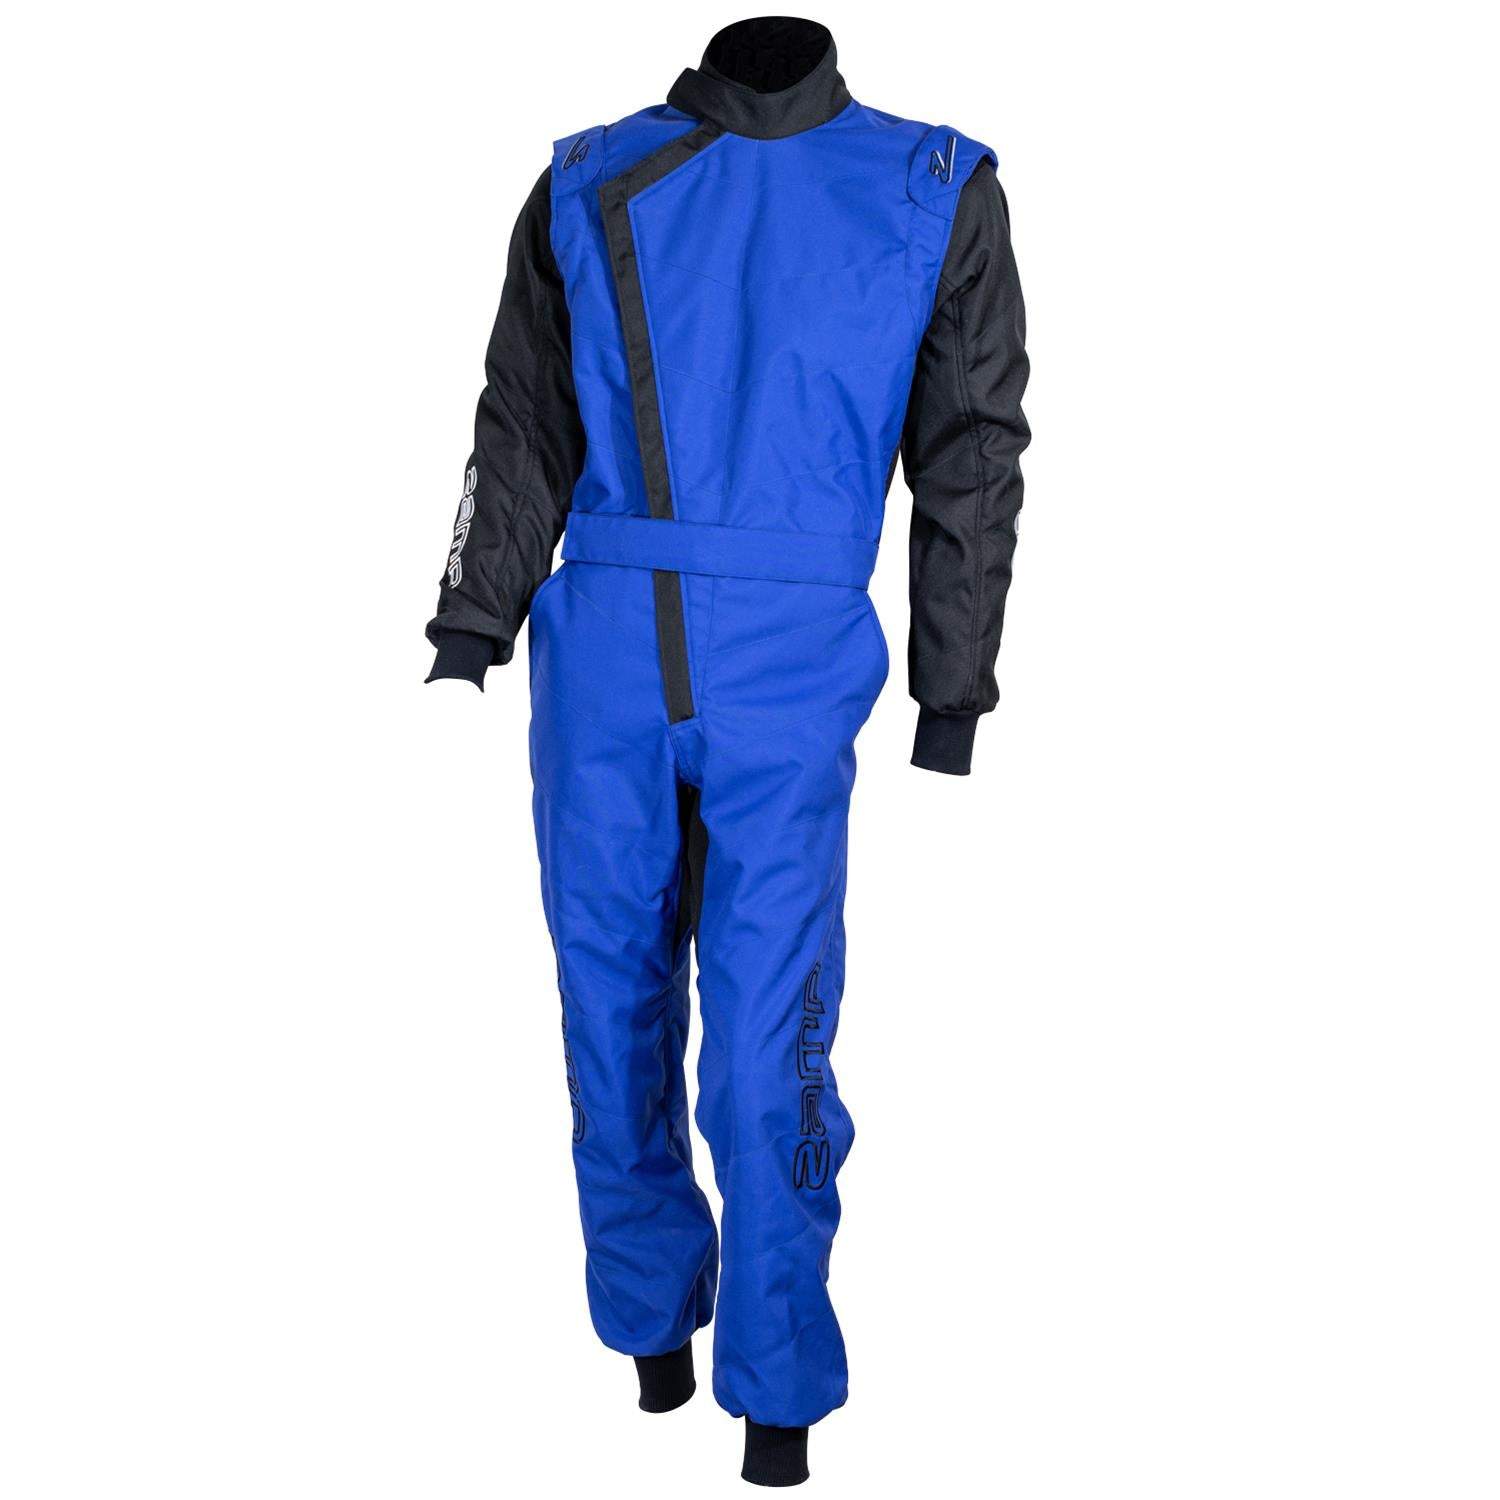 ZAMP Racing ZK-40 Youth Suit Blue R060004YS